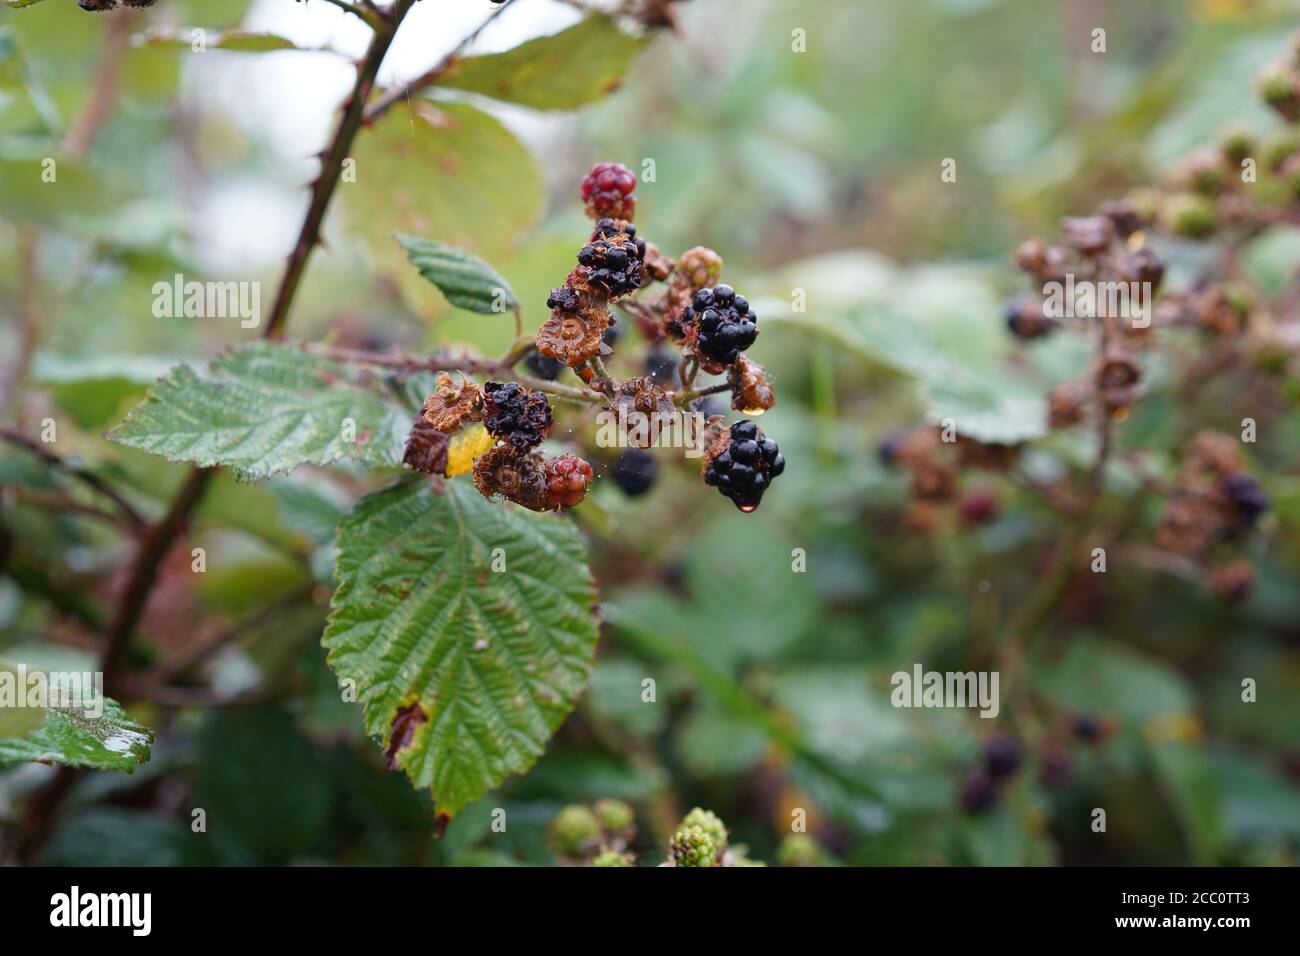 Blackberrys, Juice and leaves. Stock Photo